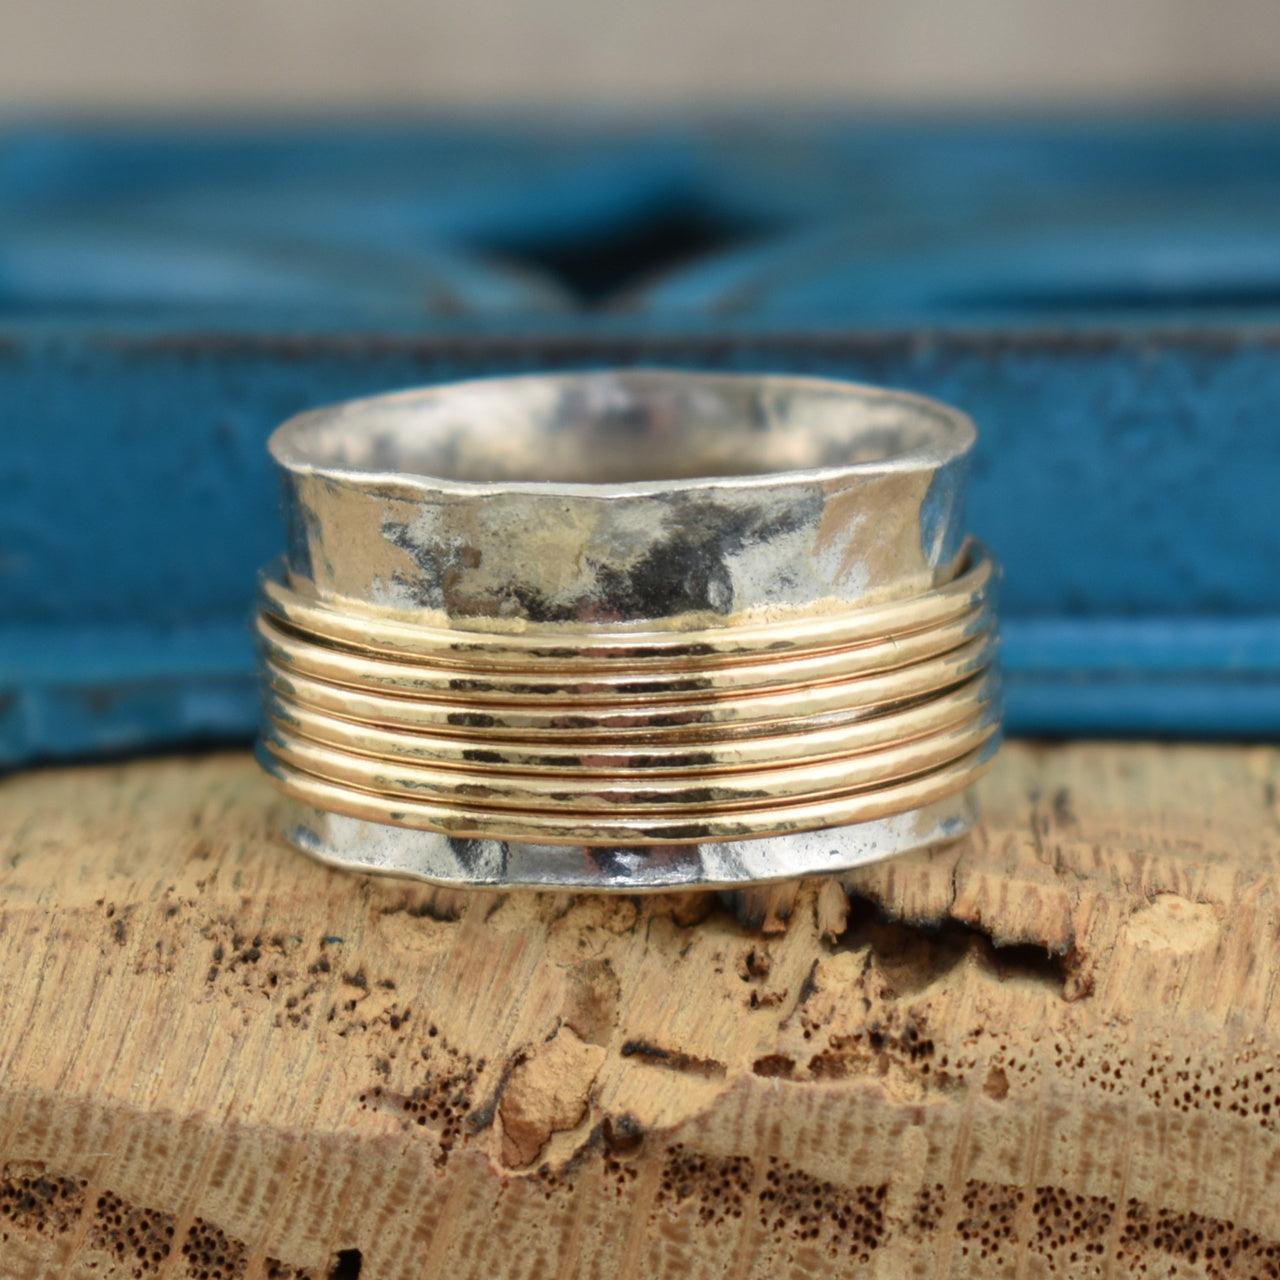 Spinner band ring in sterling silver with gold-filled bands